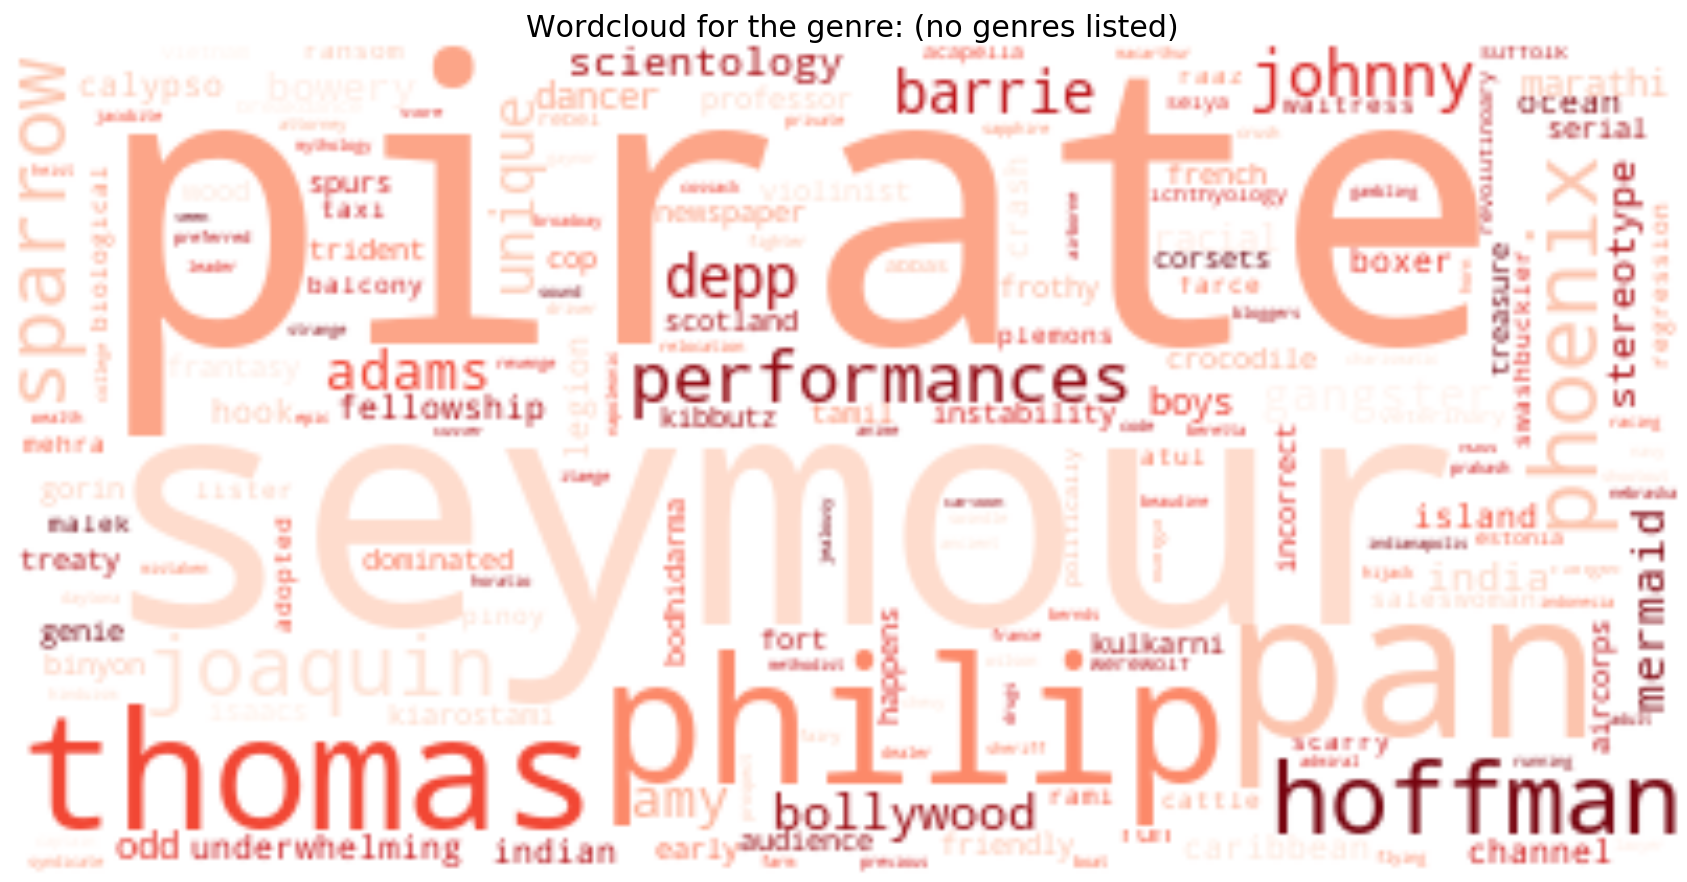 tag_wordcloud_(no genres listed).png